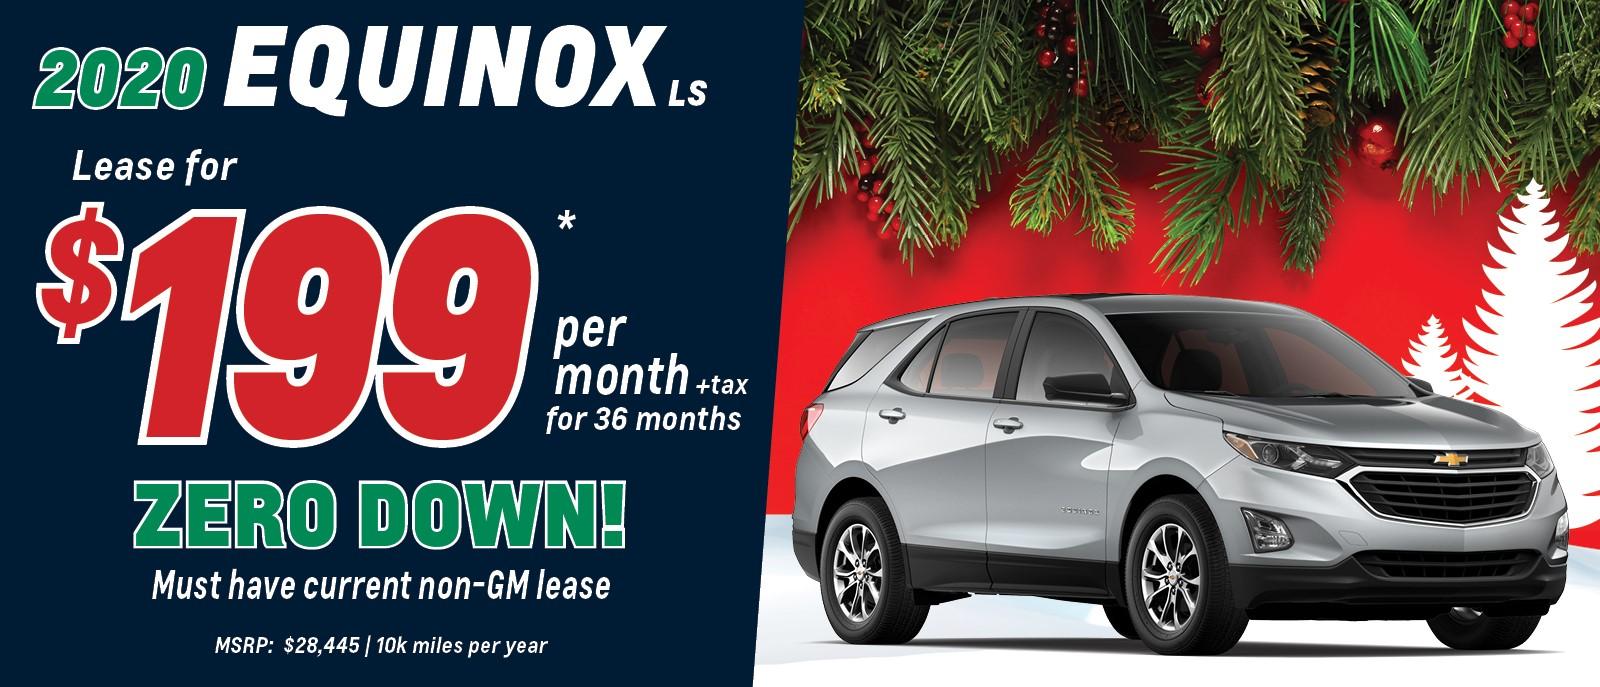 LEASE THE 2020 EQUINOX FOR ONLY $199 PER MONTH!